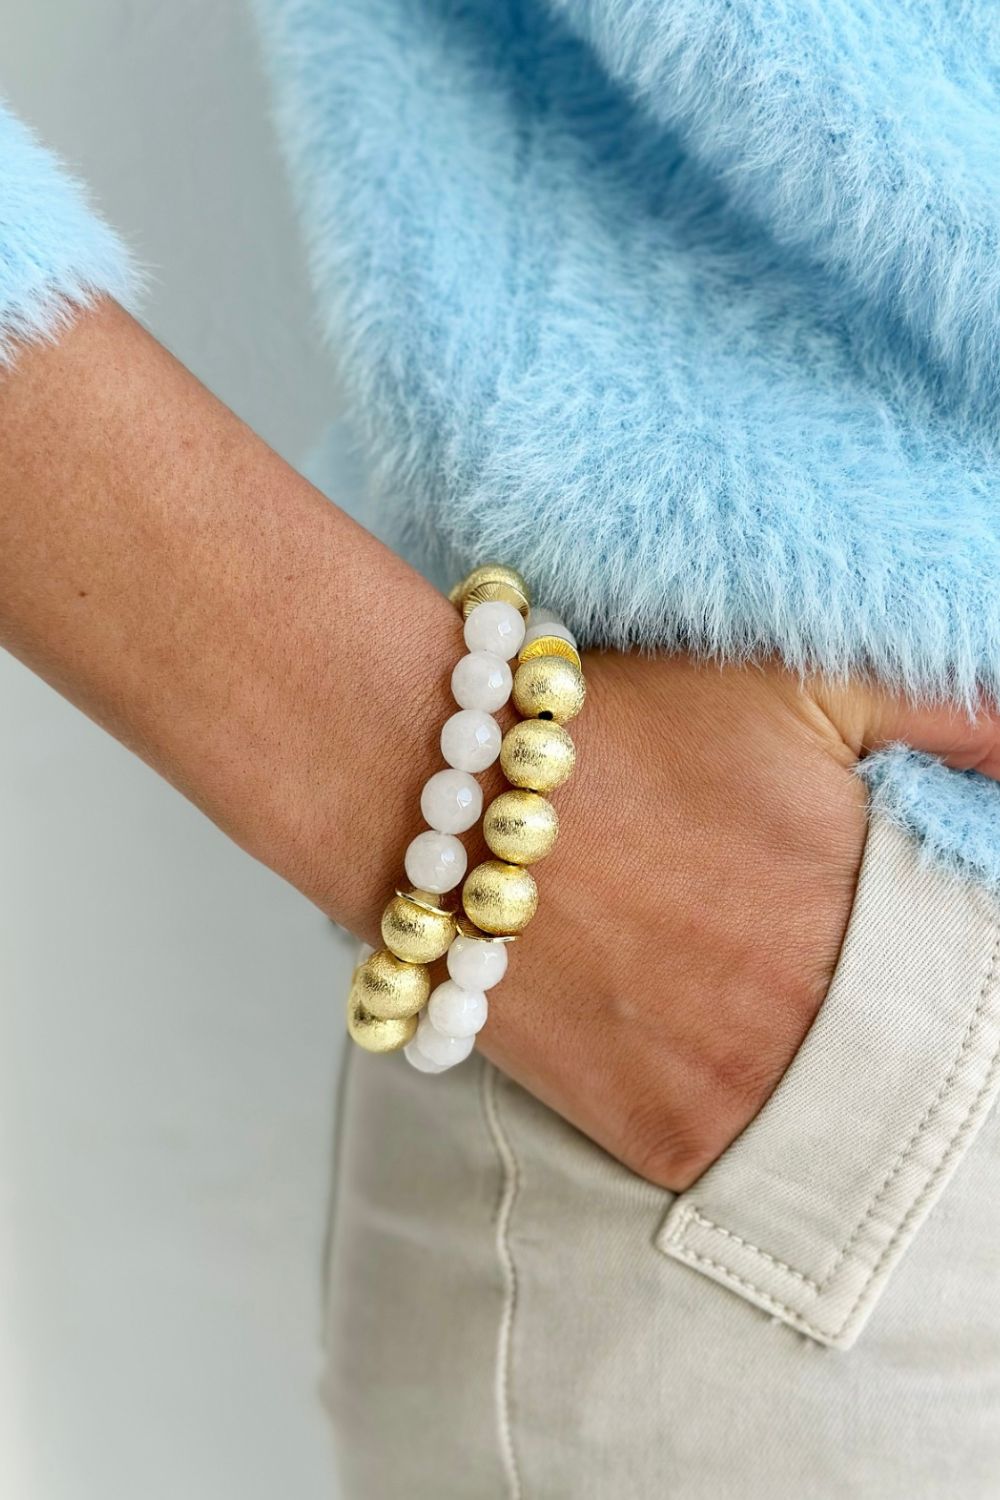 Glamour Puss bracelet - Gold and Moonstone